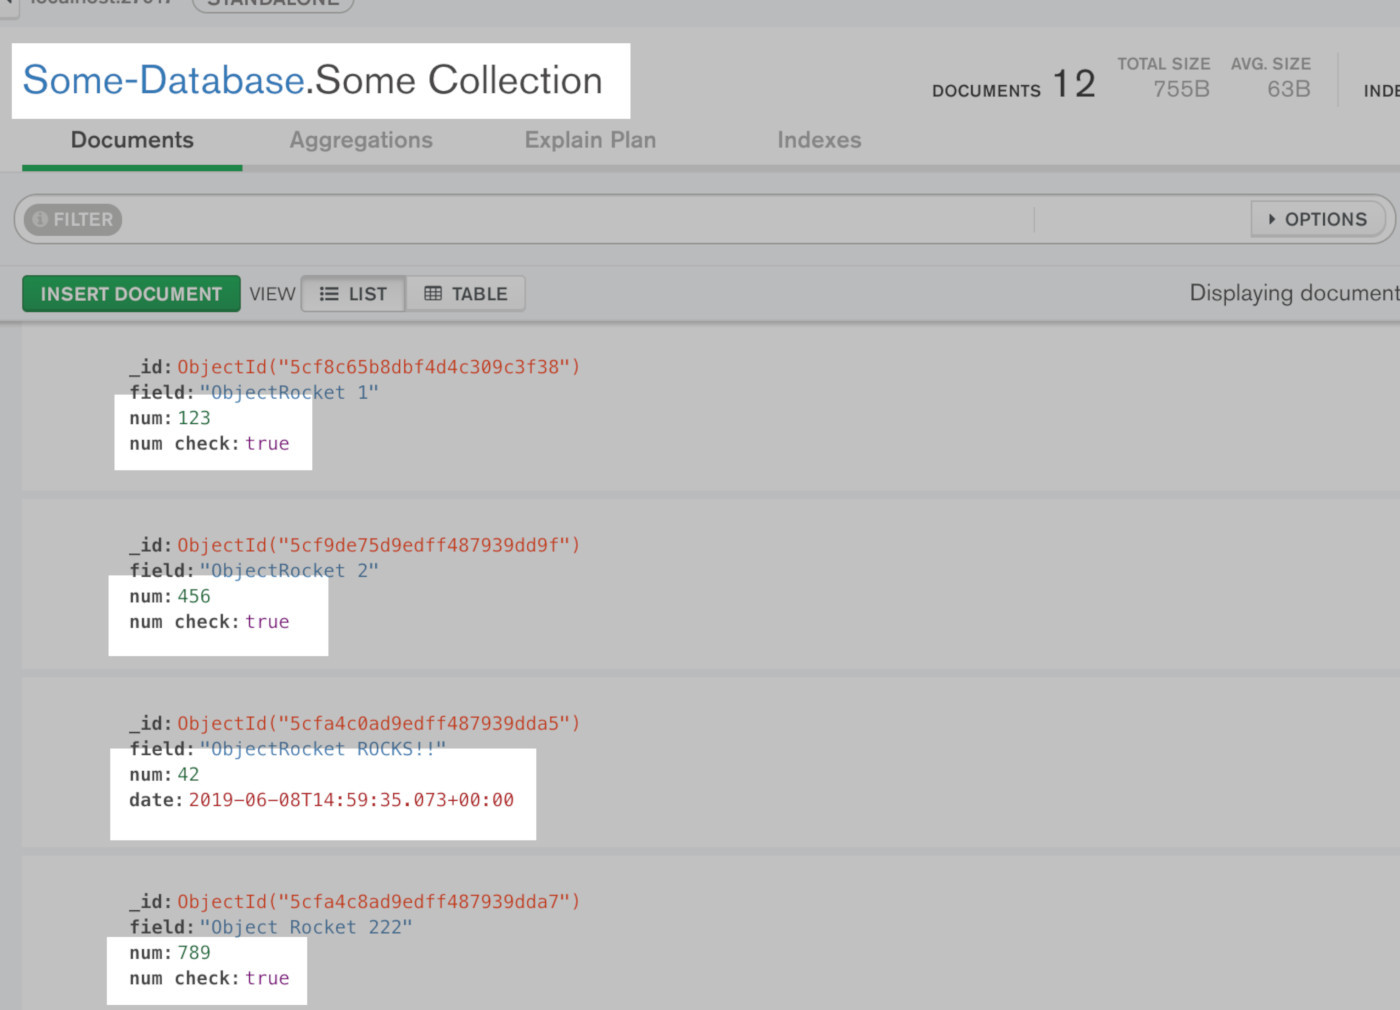 Screenshot of MongoDB Compass checking a collection's documents after update_many() method call in Python